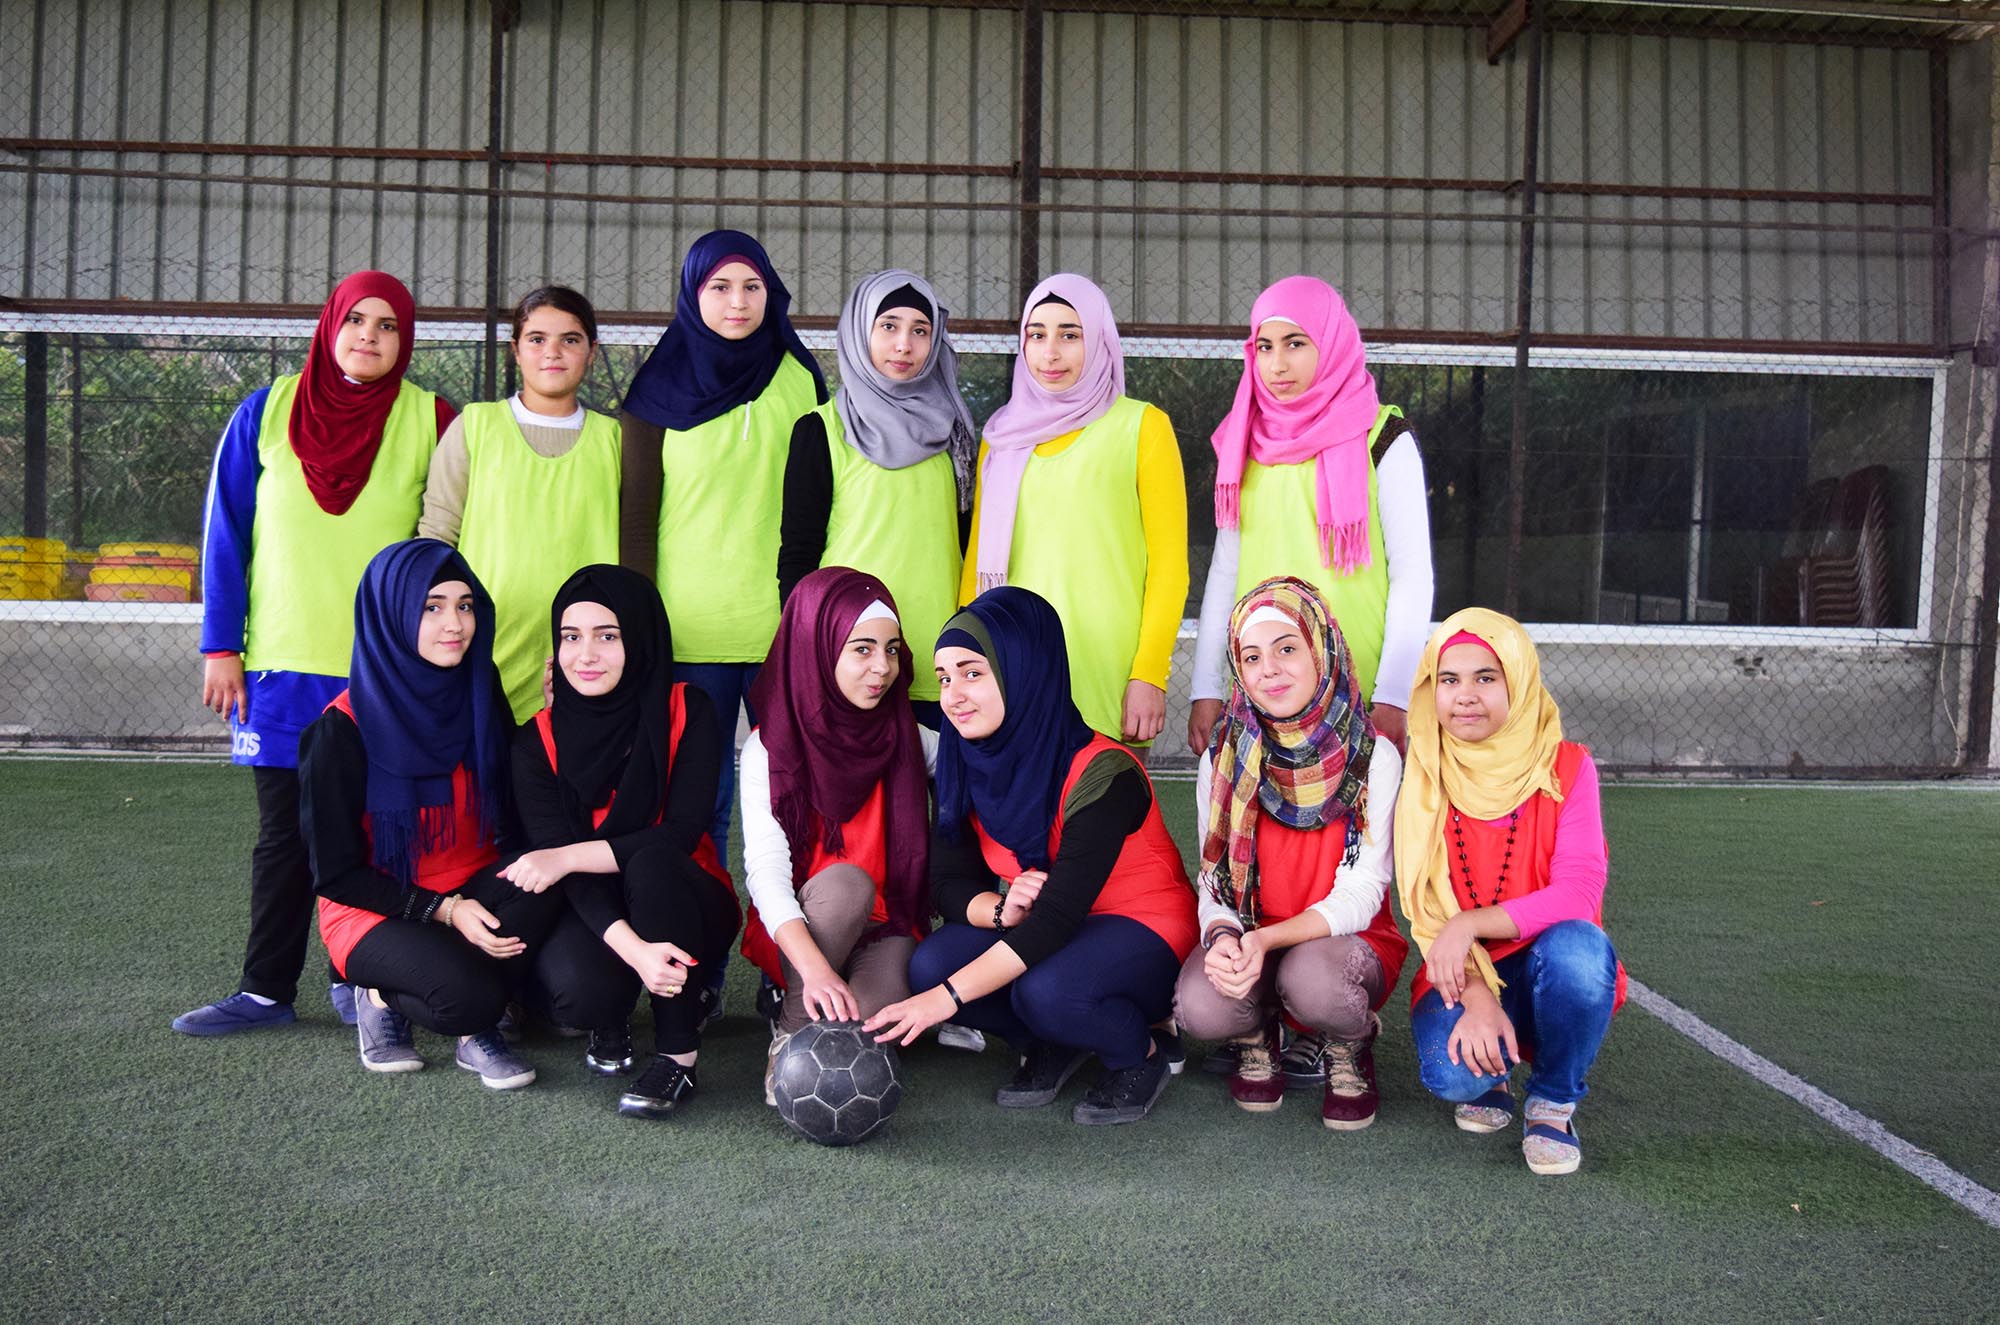 Girls on the football team association posing for a group photo.